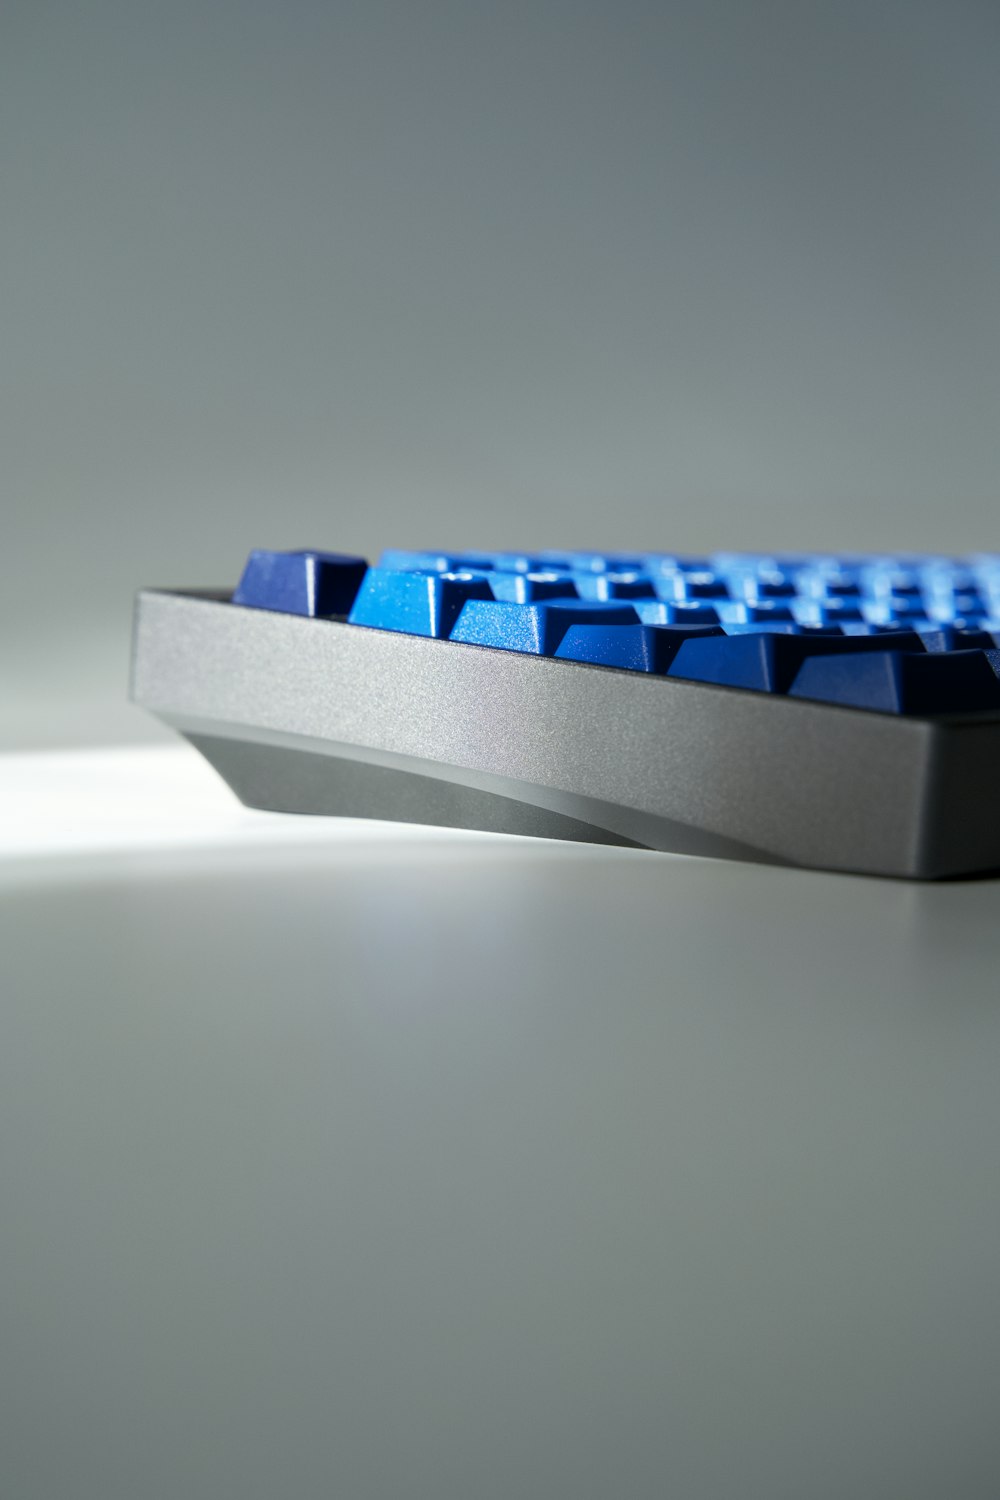 a computer keyboard sitting on top of a table